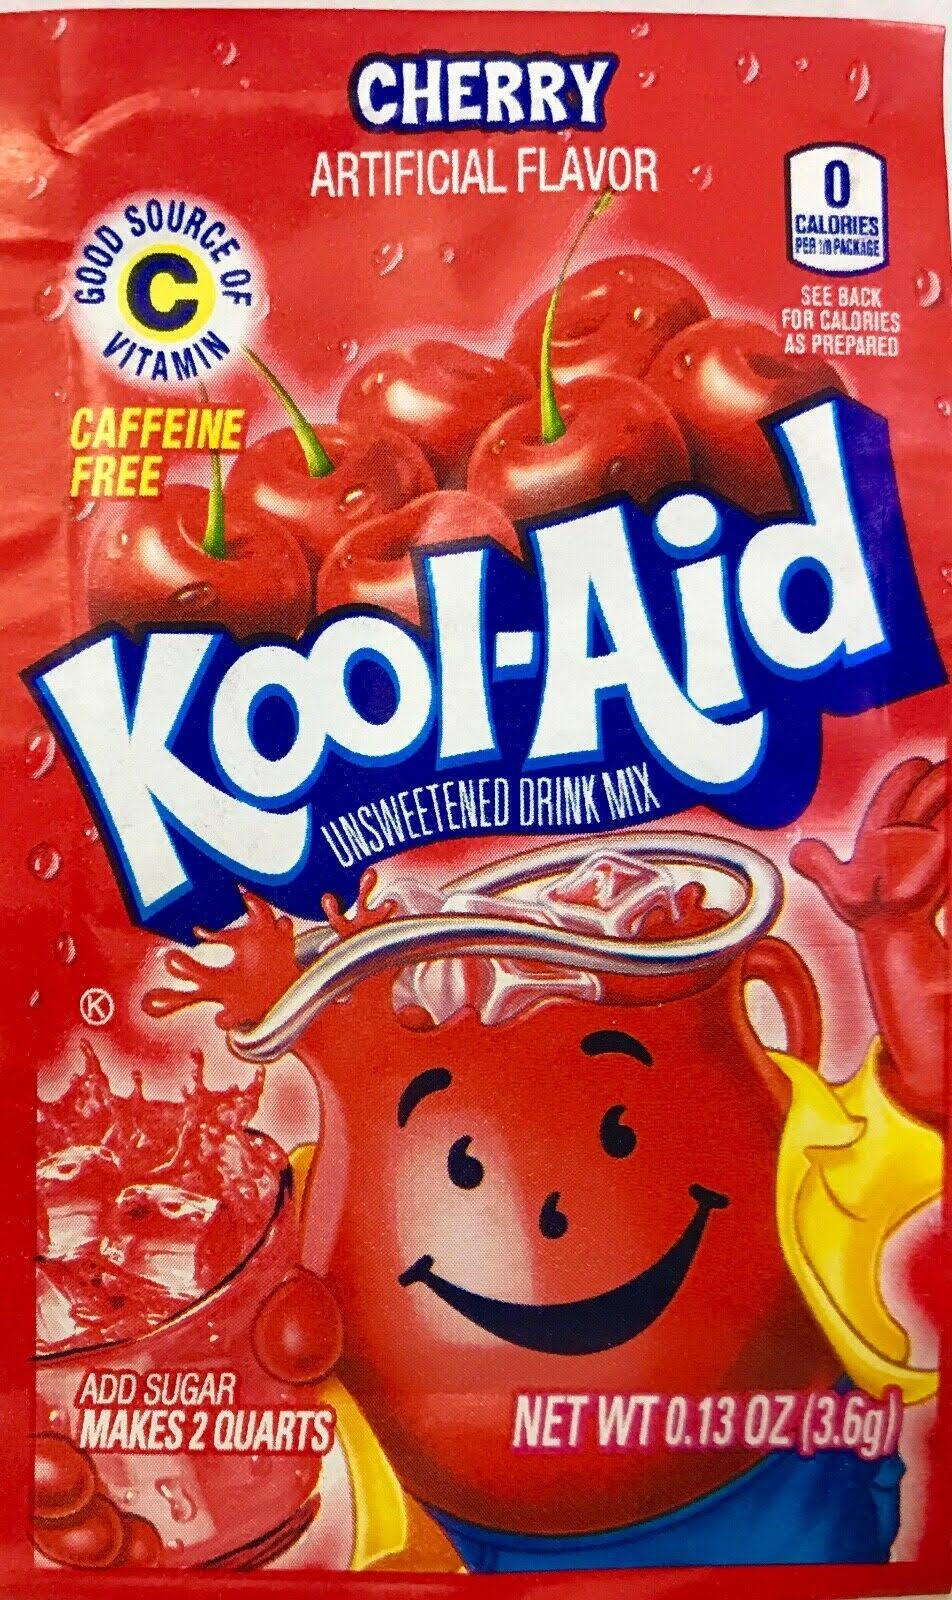 Kool-Aid Unsweetened Soft Drink Mix - Cherry Artificial Flavor, 3.6g